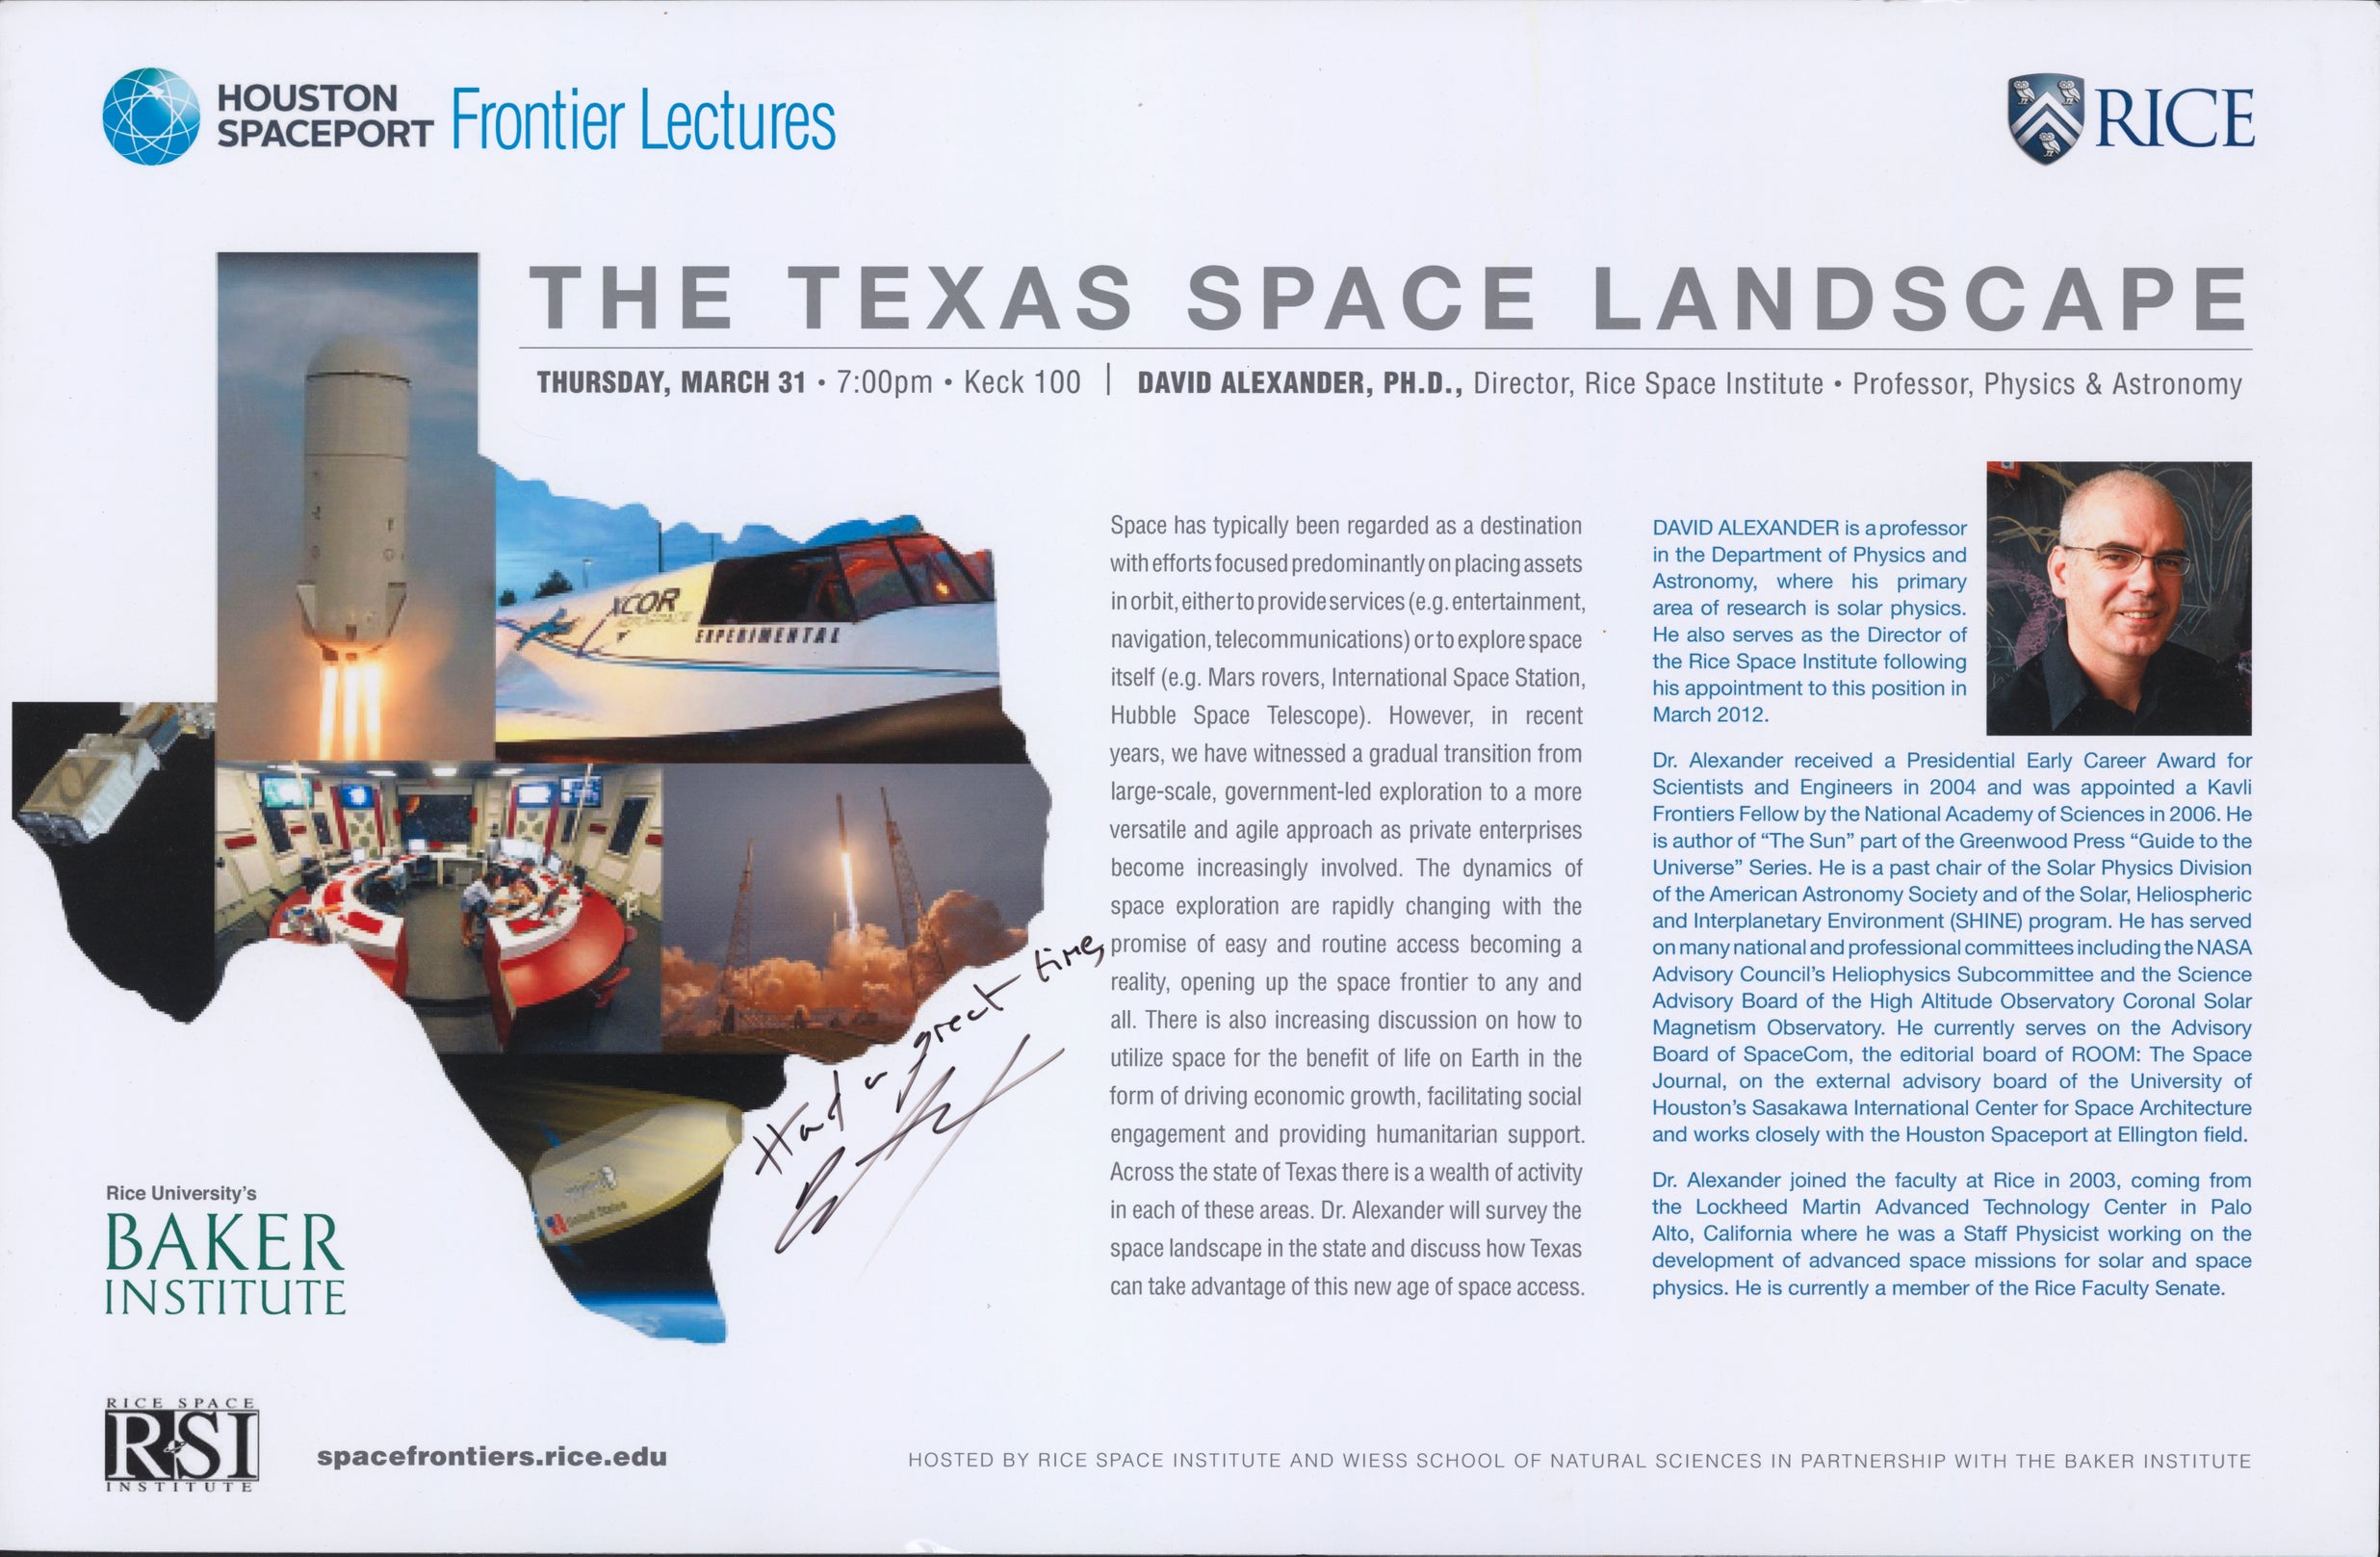 Poster of "The Texas Space Landscape" by David Alexander